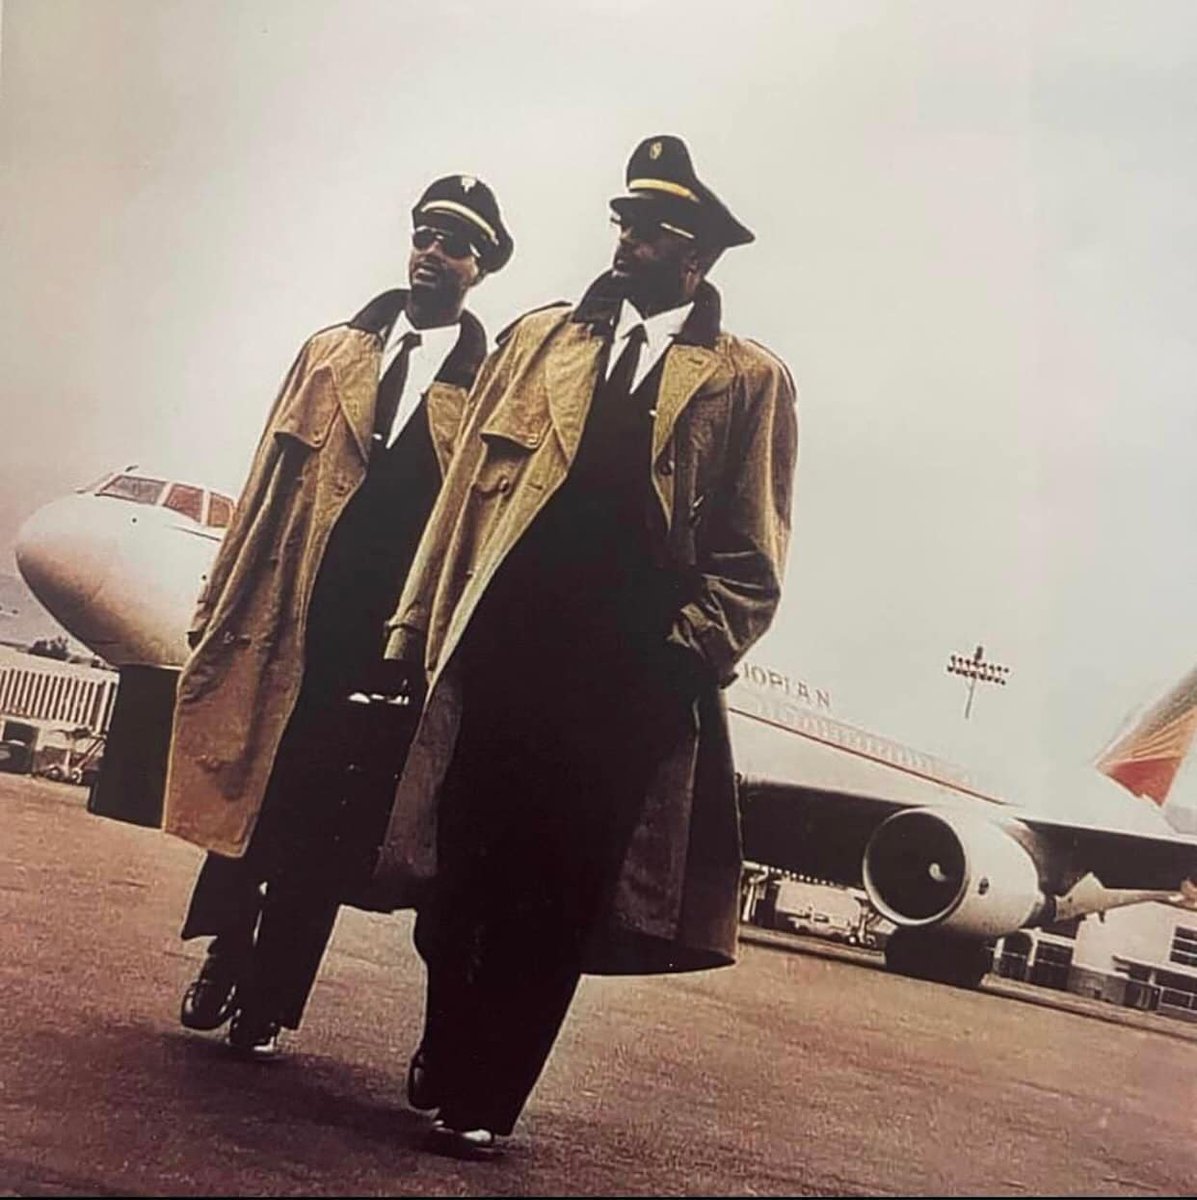 We celebrate the achievements and contributions of our pioneer aviators.
#FlyEthiopian #throwback